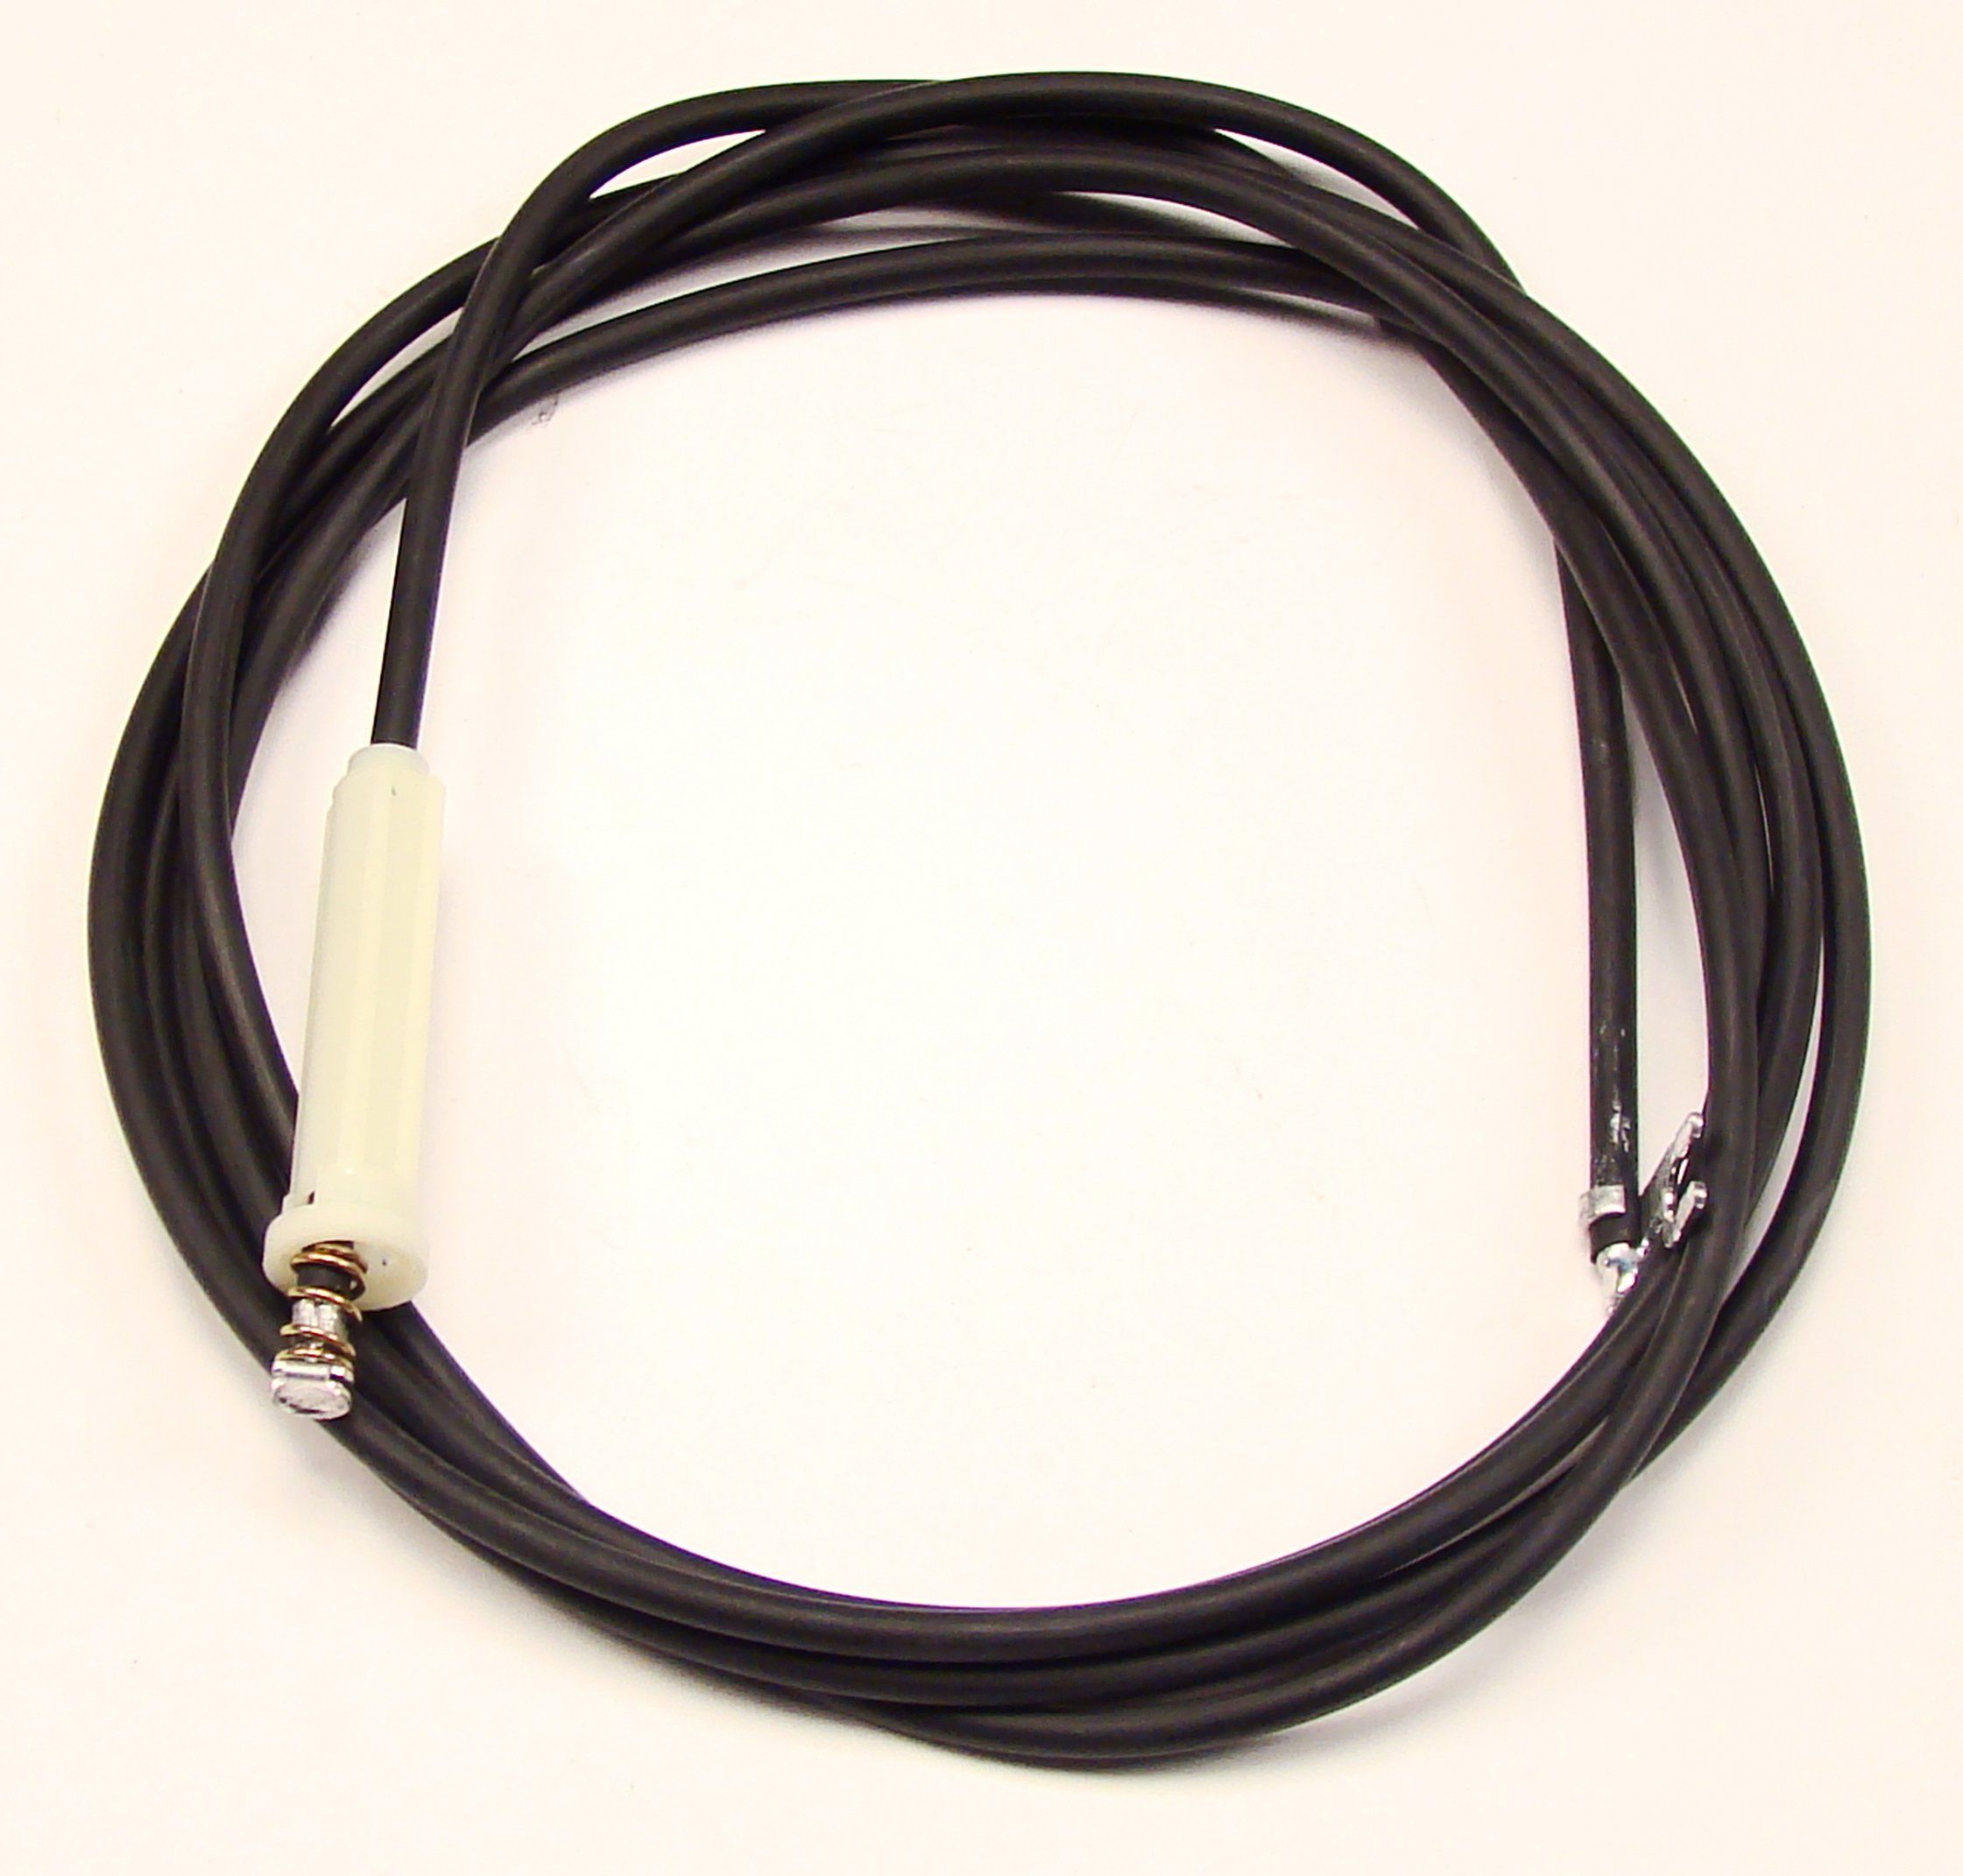 american-autowire, A/C Power Feed Wire